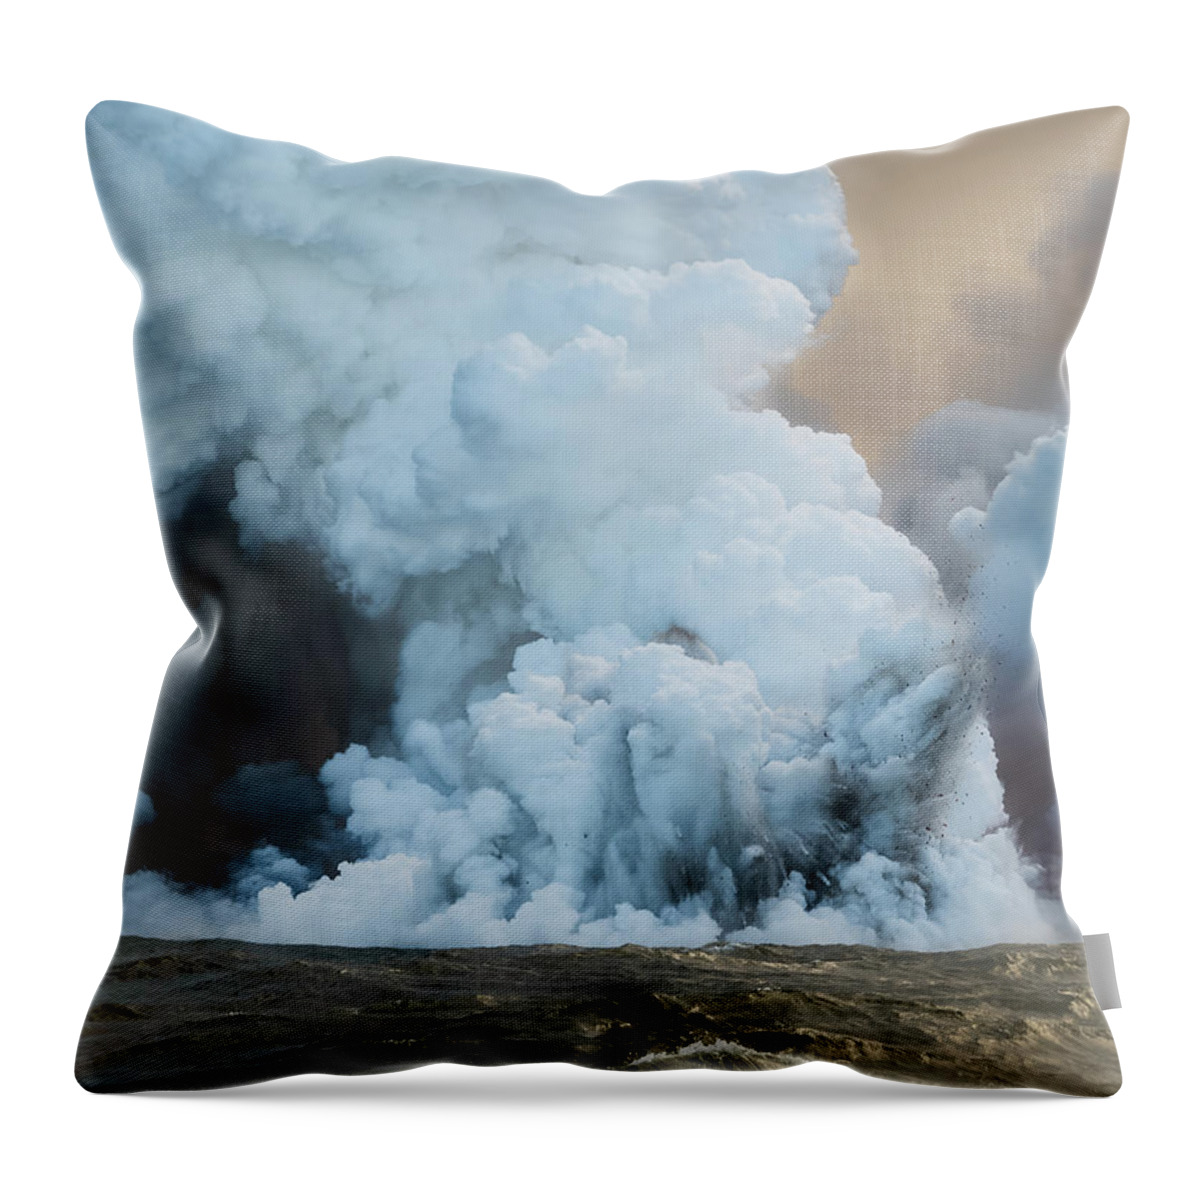 Lava Throw Pillow featuring the photograph Submerged Lava Bomb by William Dickman